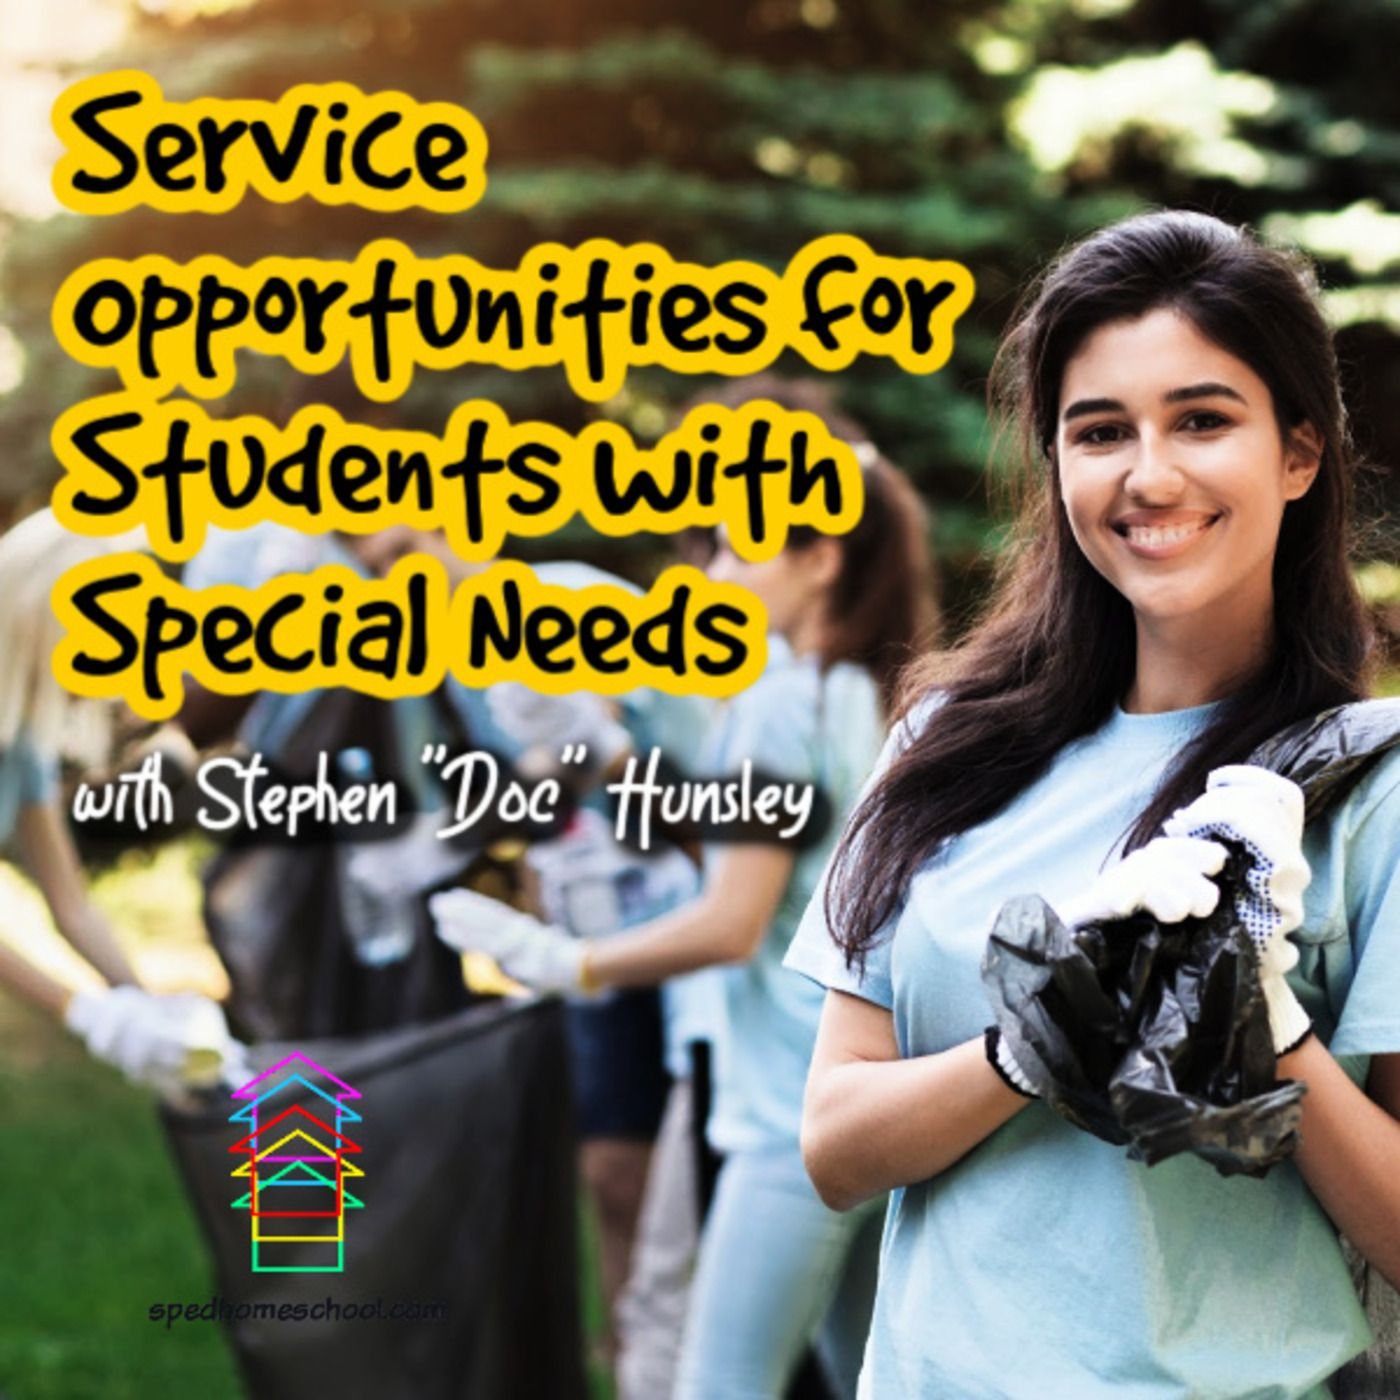 Service Opportunities for Students with Special Needs